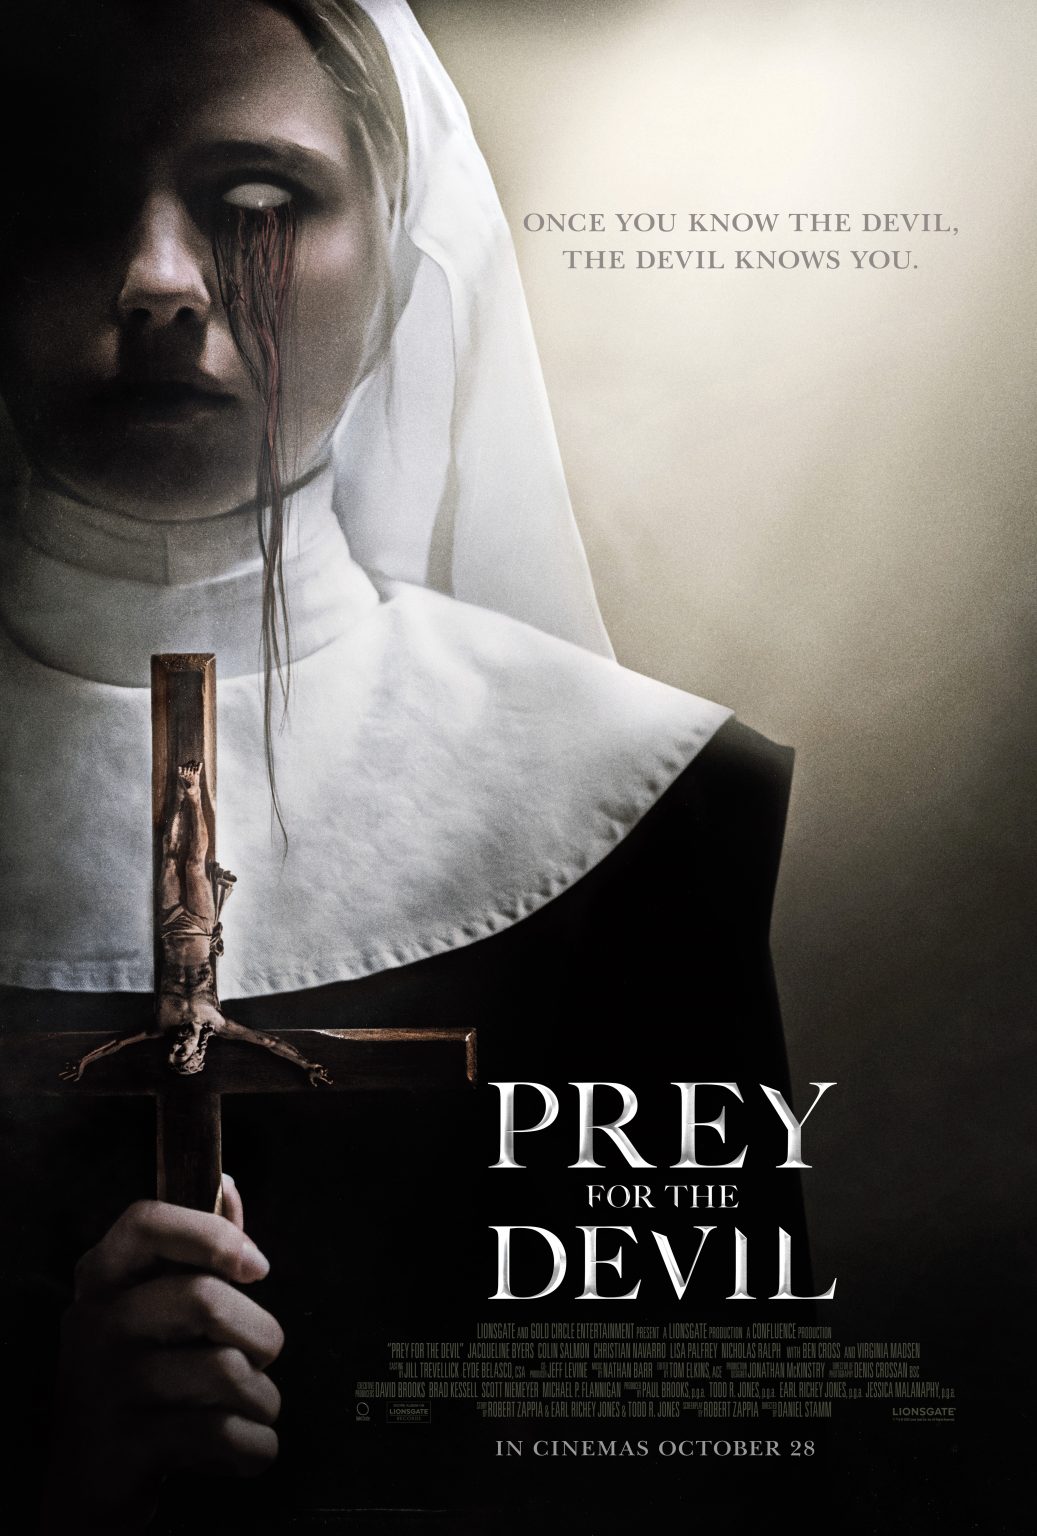 Lionsgate Have Dropped A Fresh New Trailer For Upcoming Demonic Horror ...